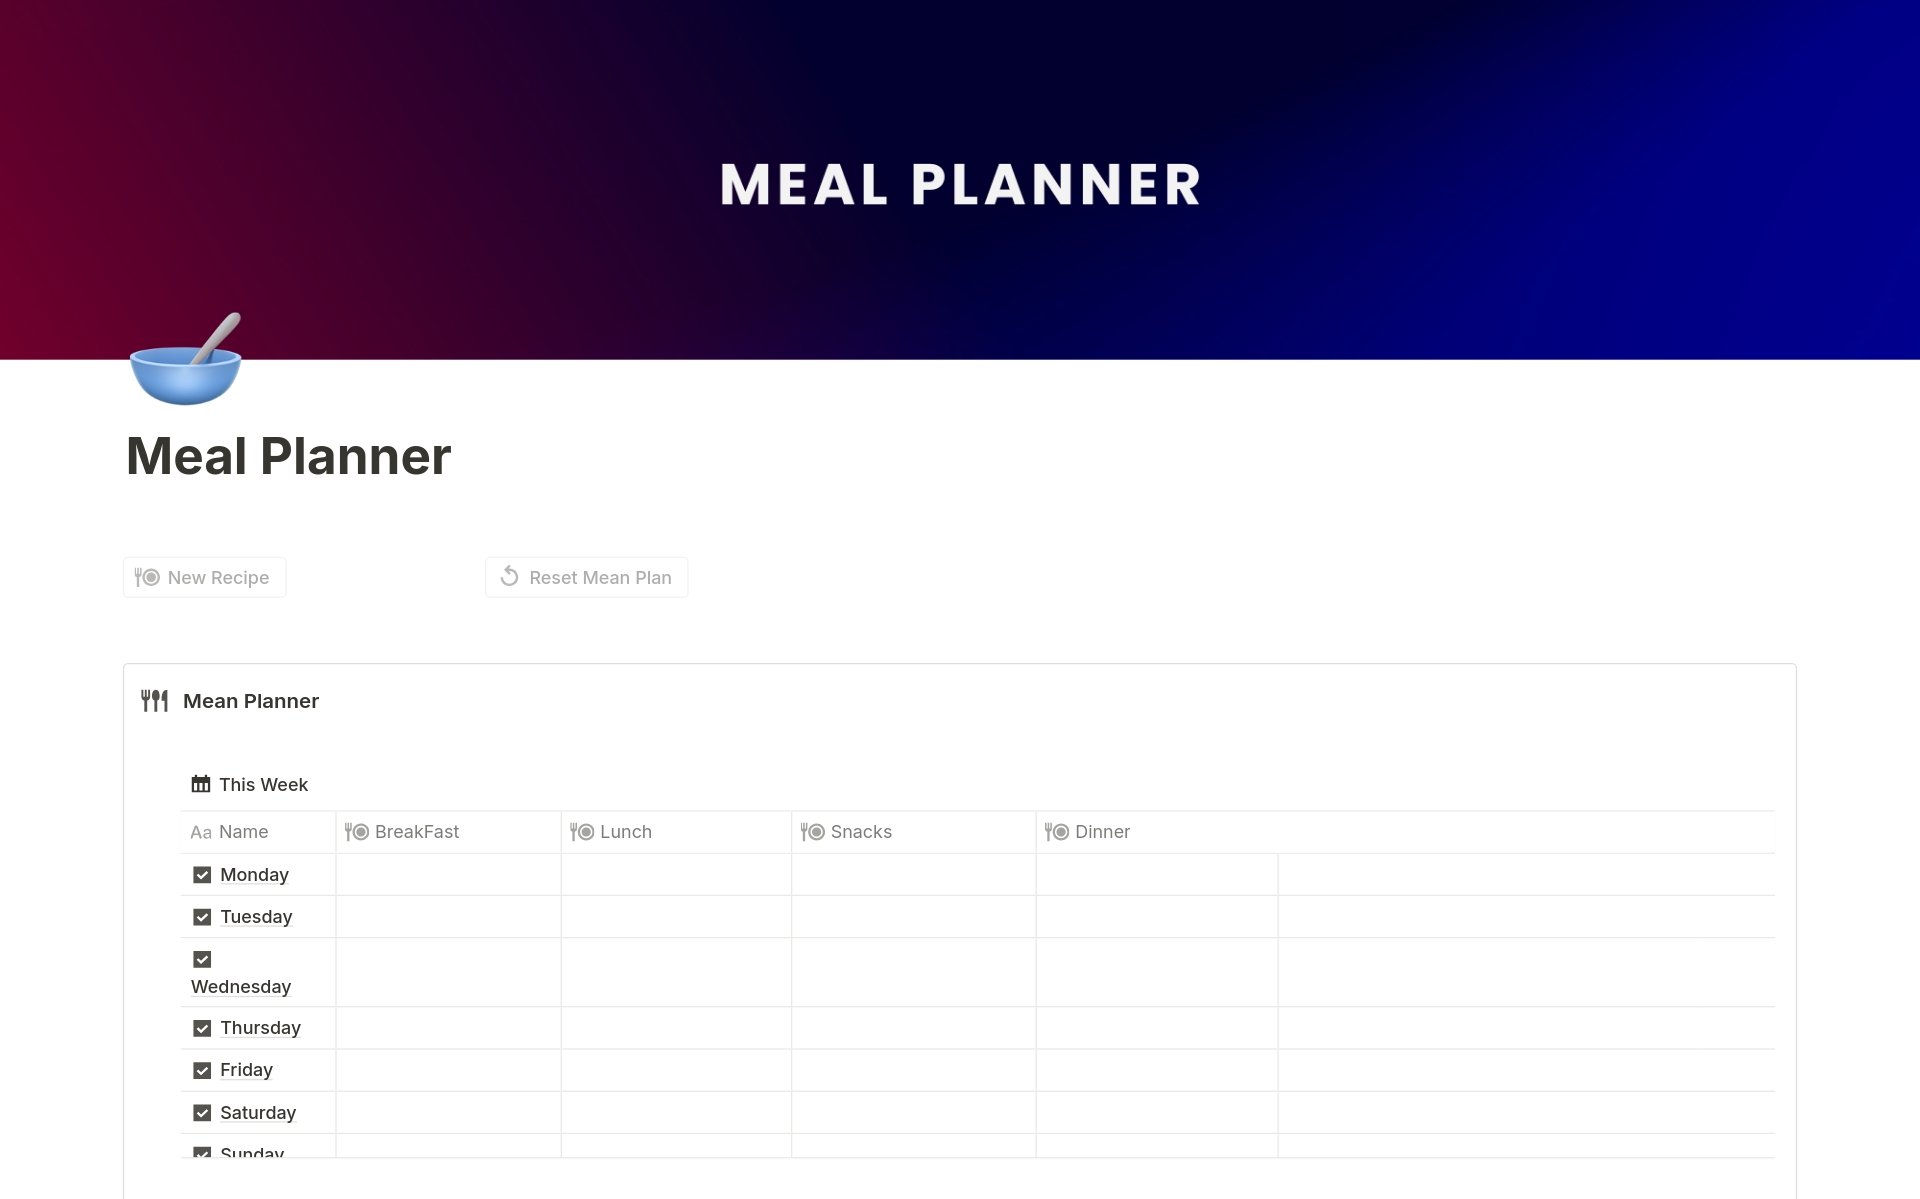 Streamline your meal planning with the Notion Meal Planner. Track recipes, plan your meals, and stay organized in the kitchen.